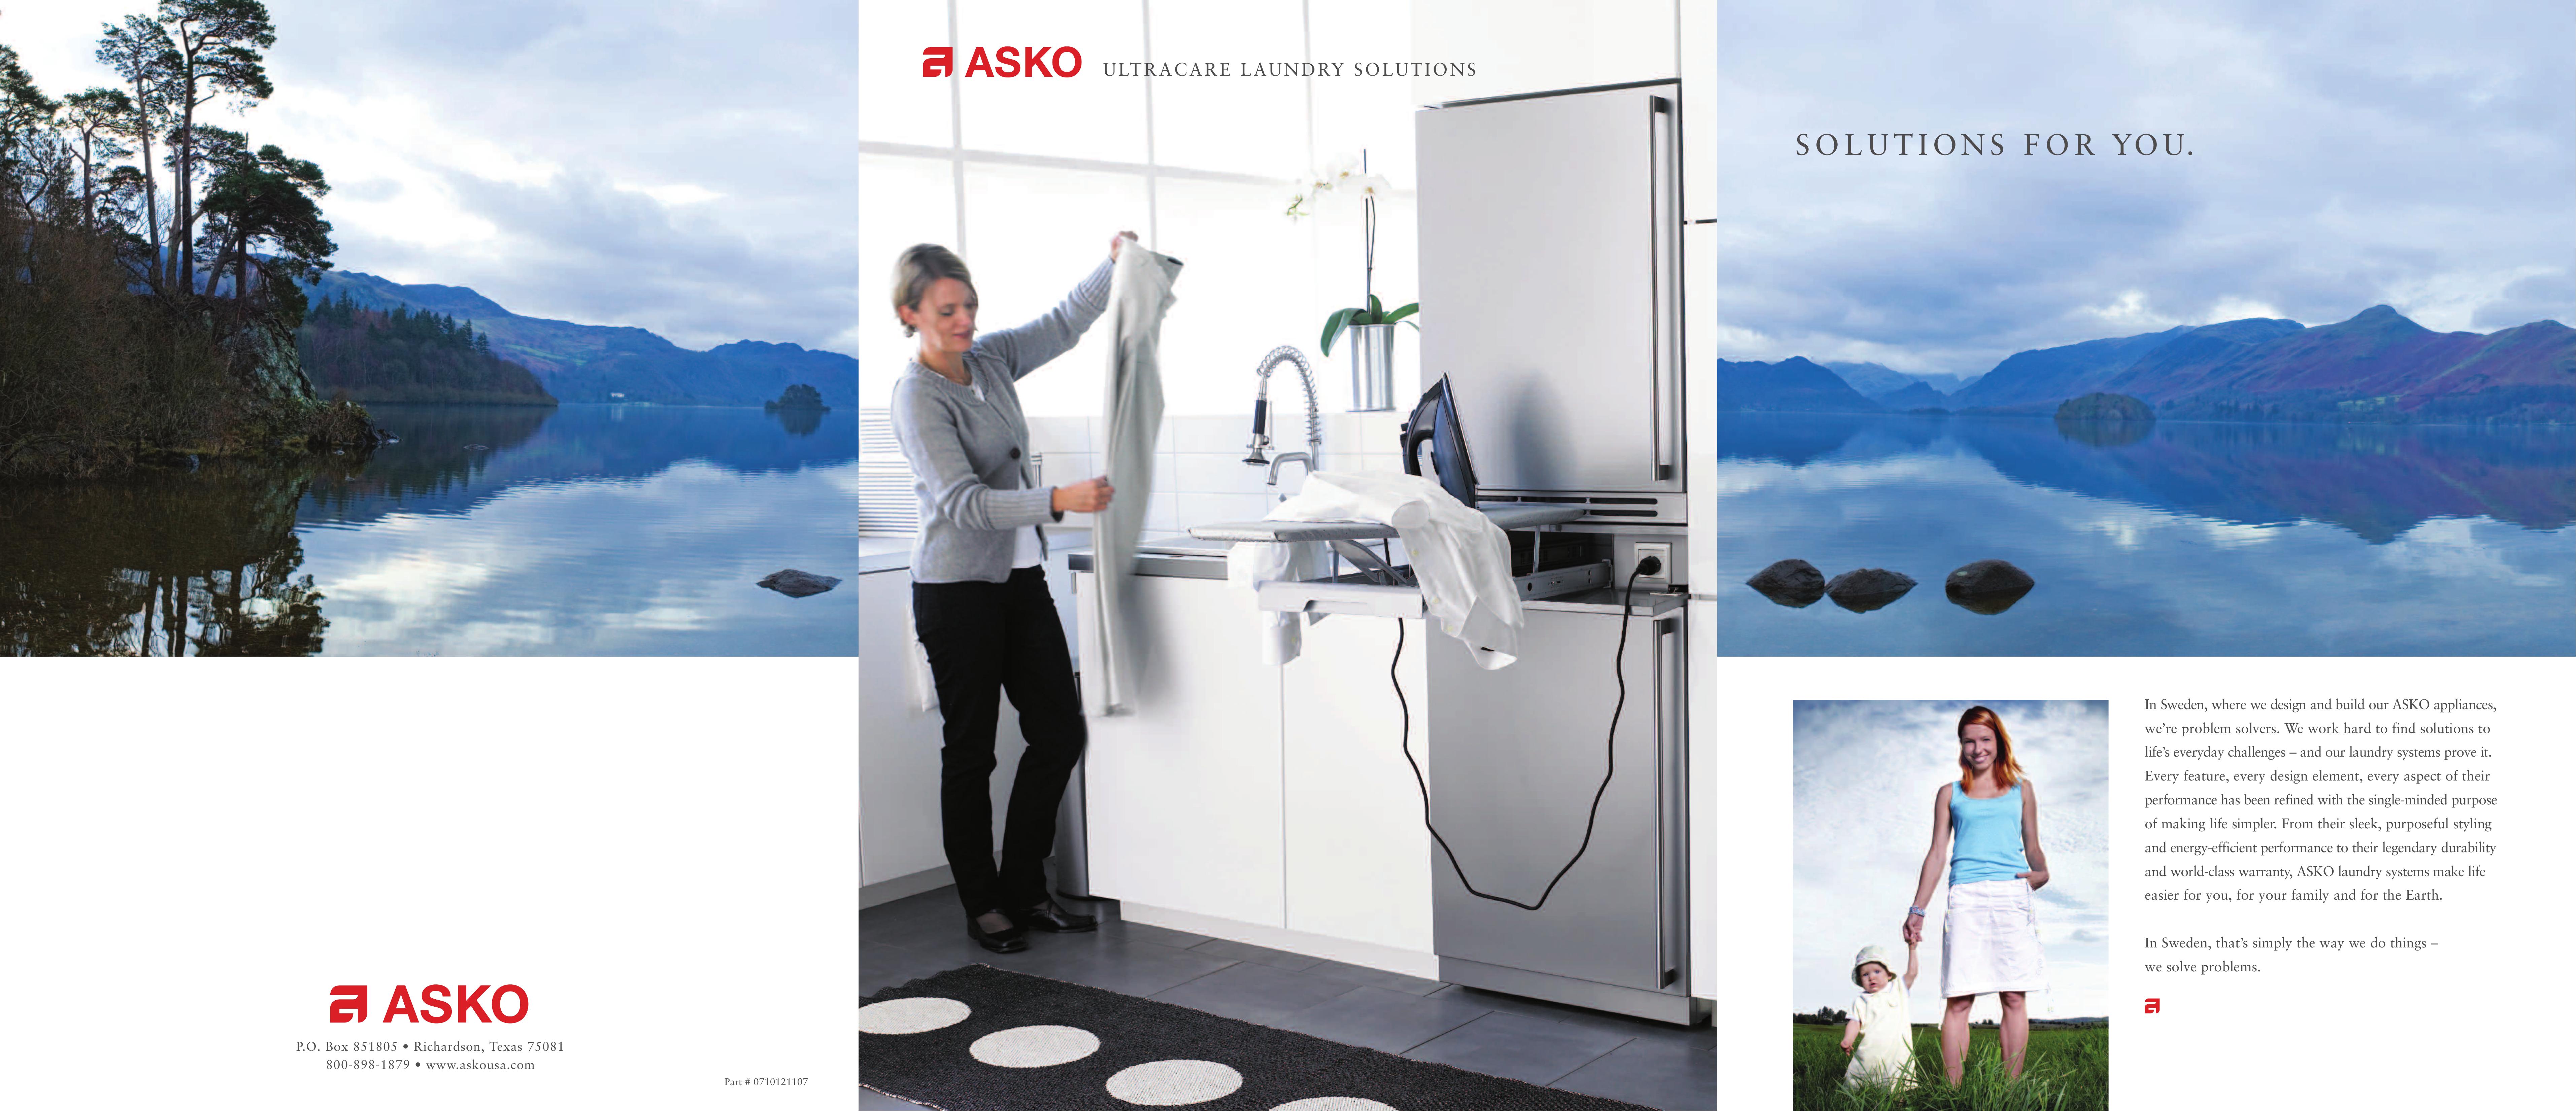 Asko Washer/Dryer Combination Laundry System Washer/Dryer User Manual